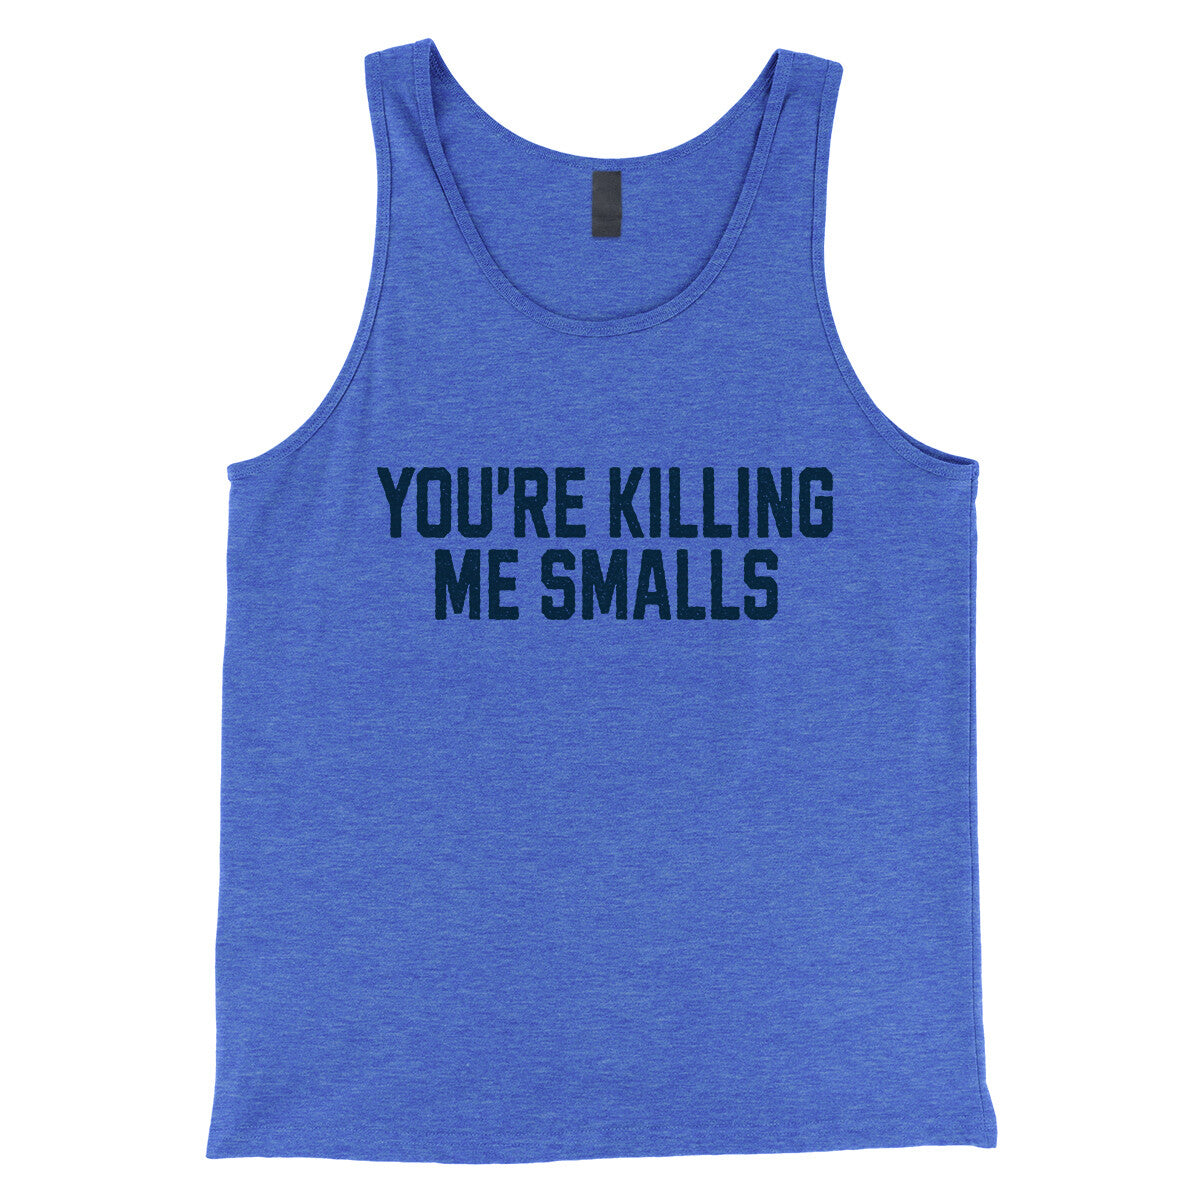 You're Killing me Smalls in True Royal TriBlend Color